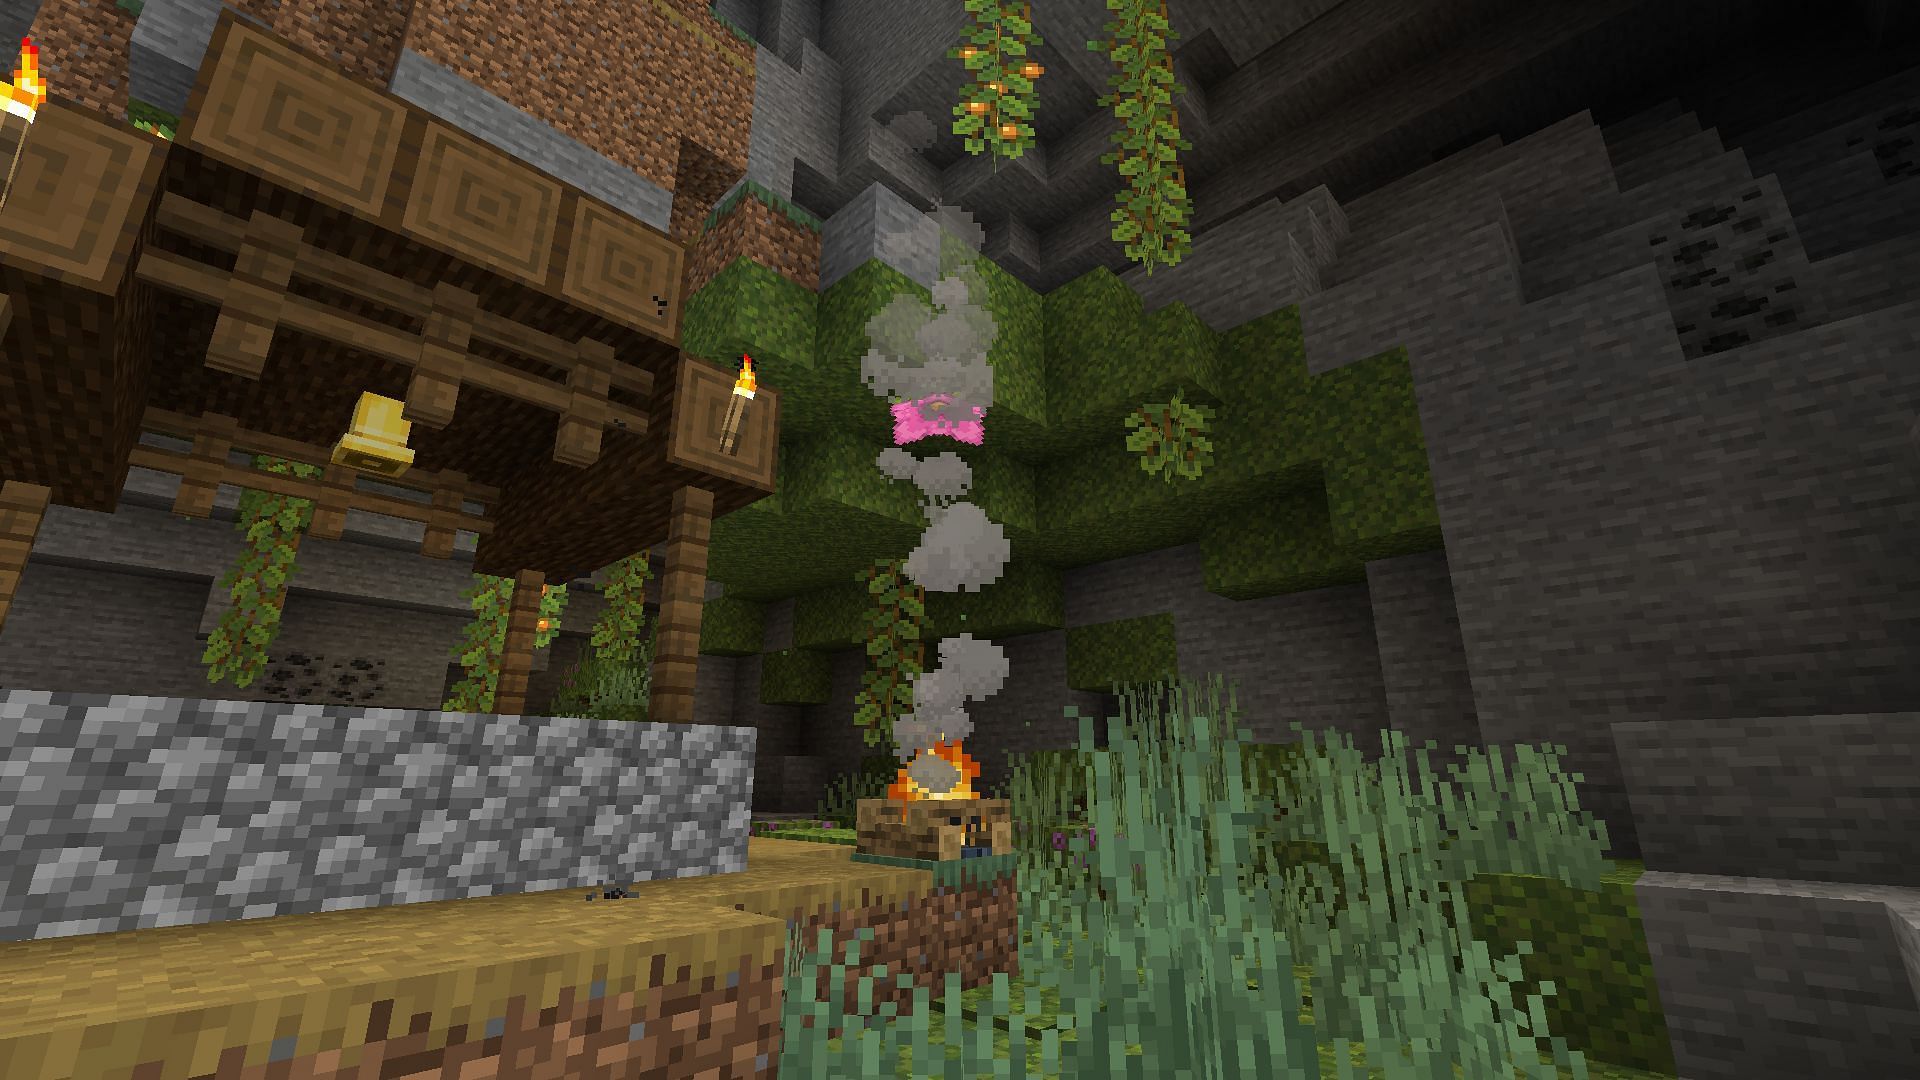 The village that is part of the lush cave (Image via Minecraft)